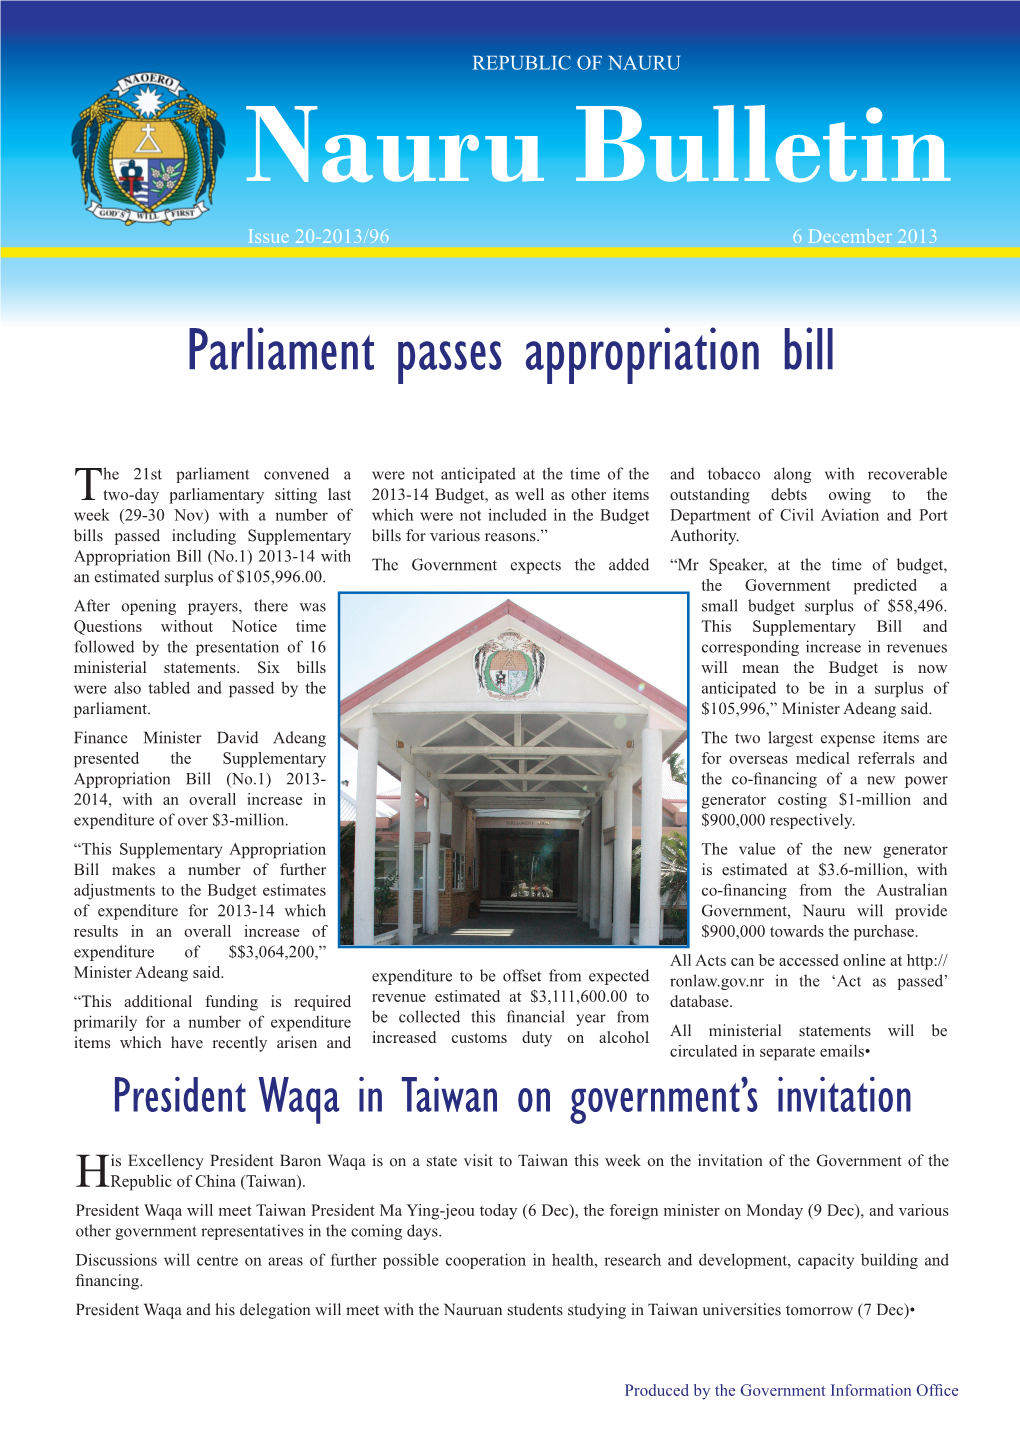 Parliament Passes Appropriation Bill